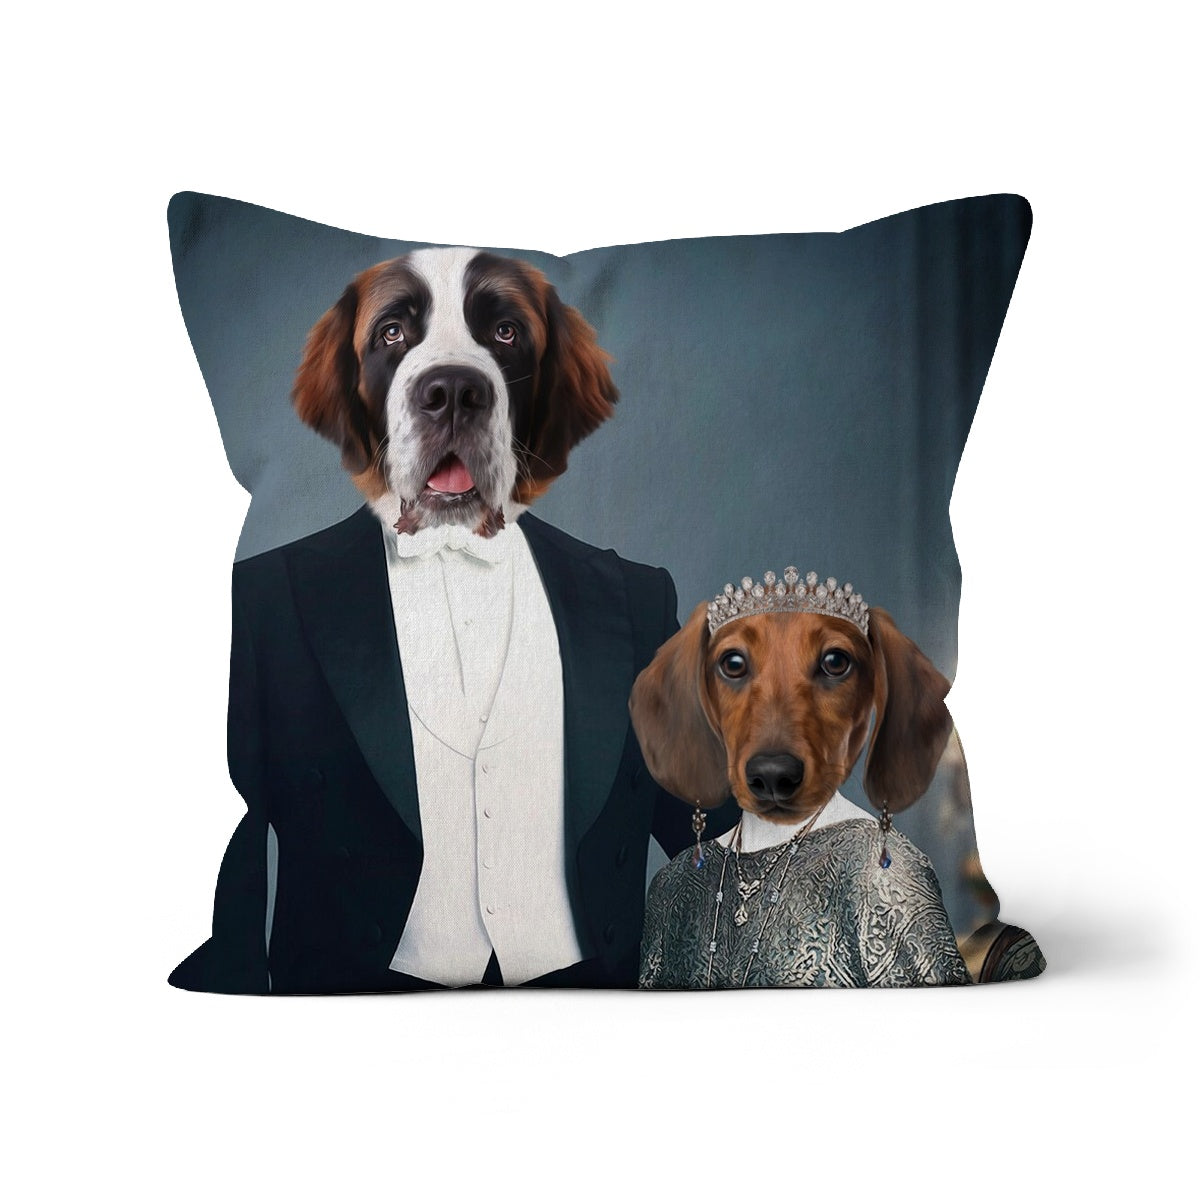 Robert & Cora (Downton Abbey Inspired): Custom Pet Pillow , Paw & Glory, paw and glory, personalised dog pillows, dog photo on pillow, pillow with dogs face, dog pillow cases, pillow custom, pet custom pillow